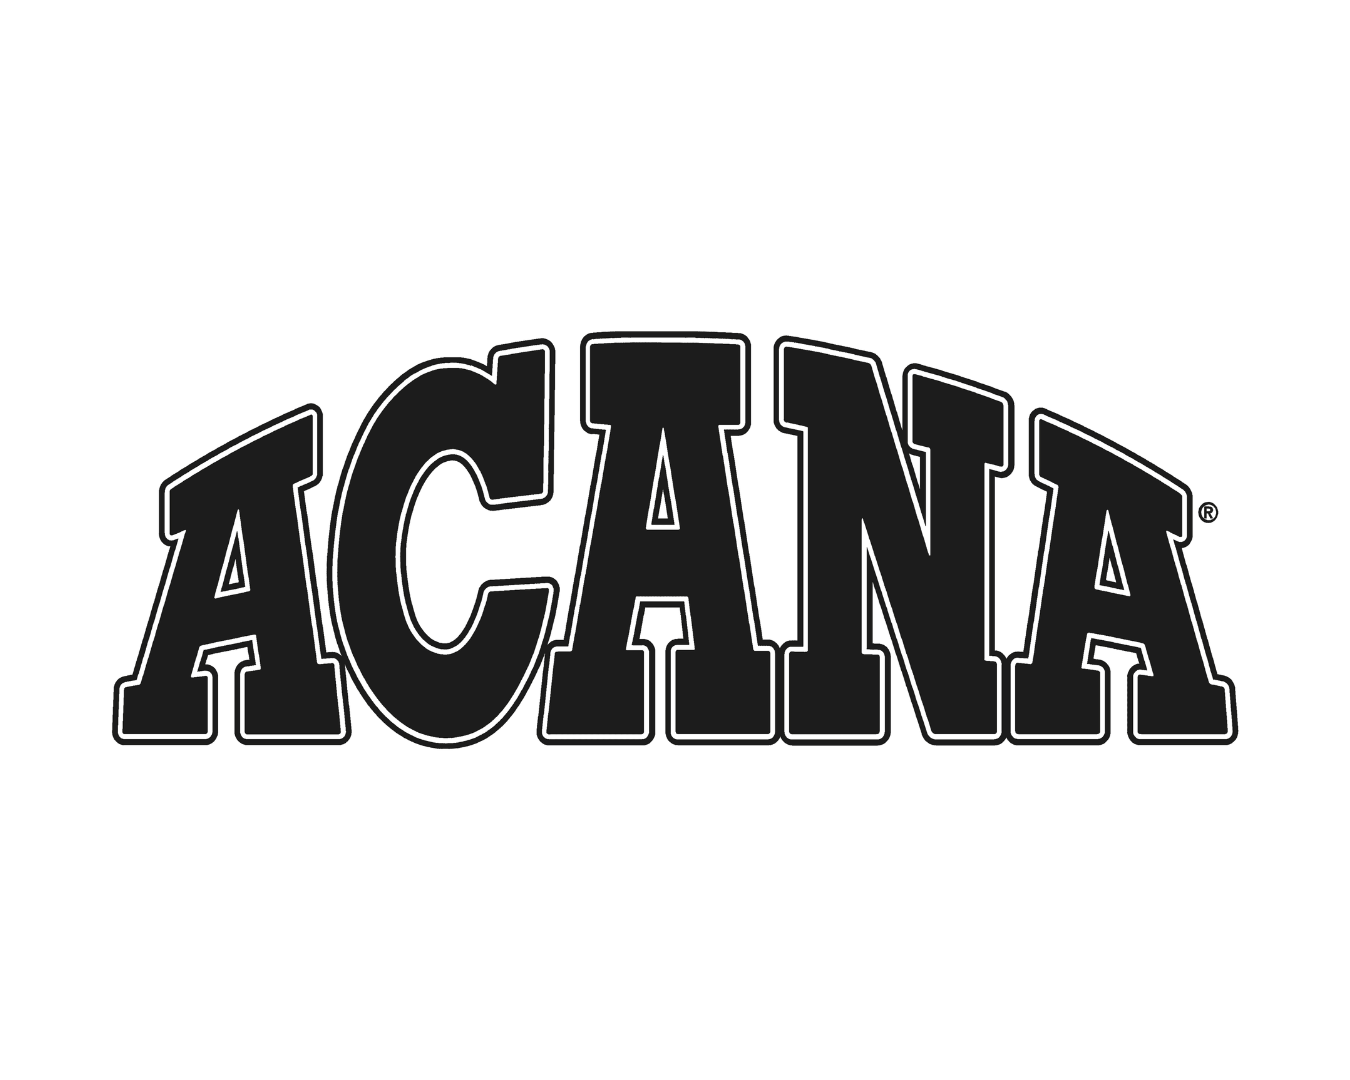 ACANA pet food logo featuring the brand name in bold black text with stylized lettering.